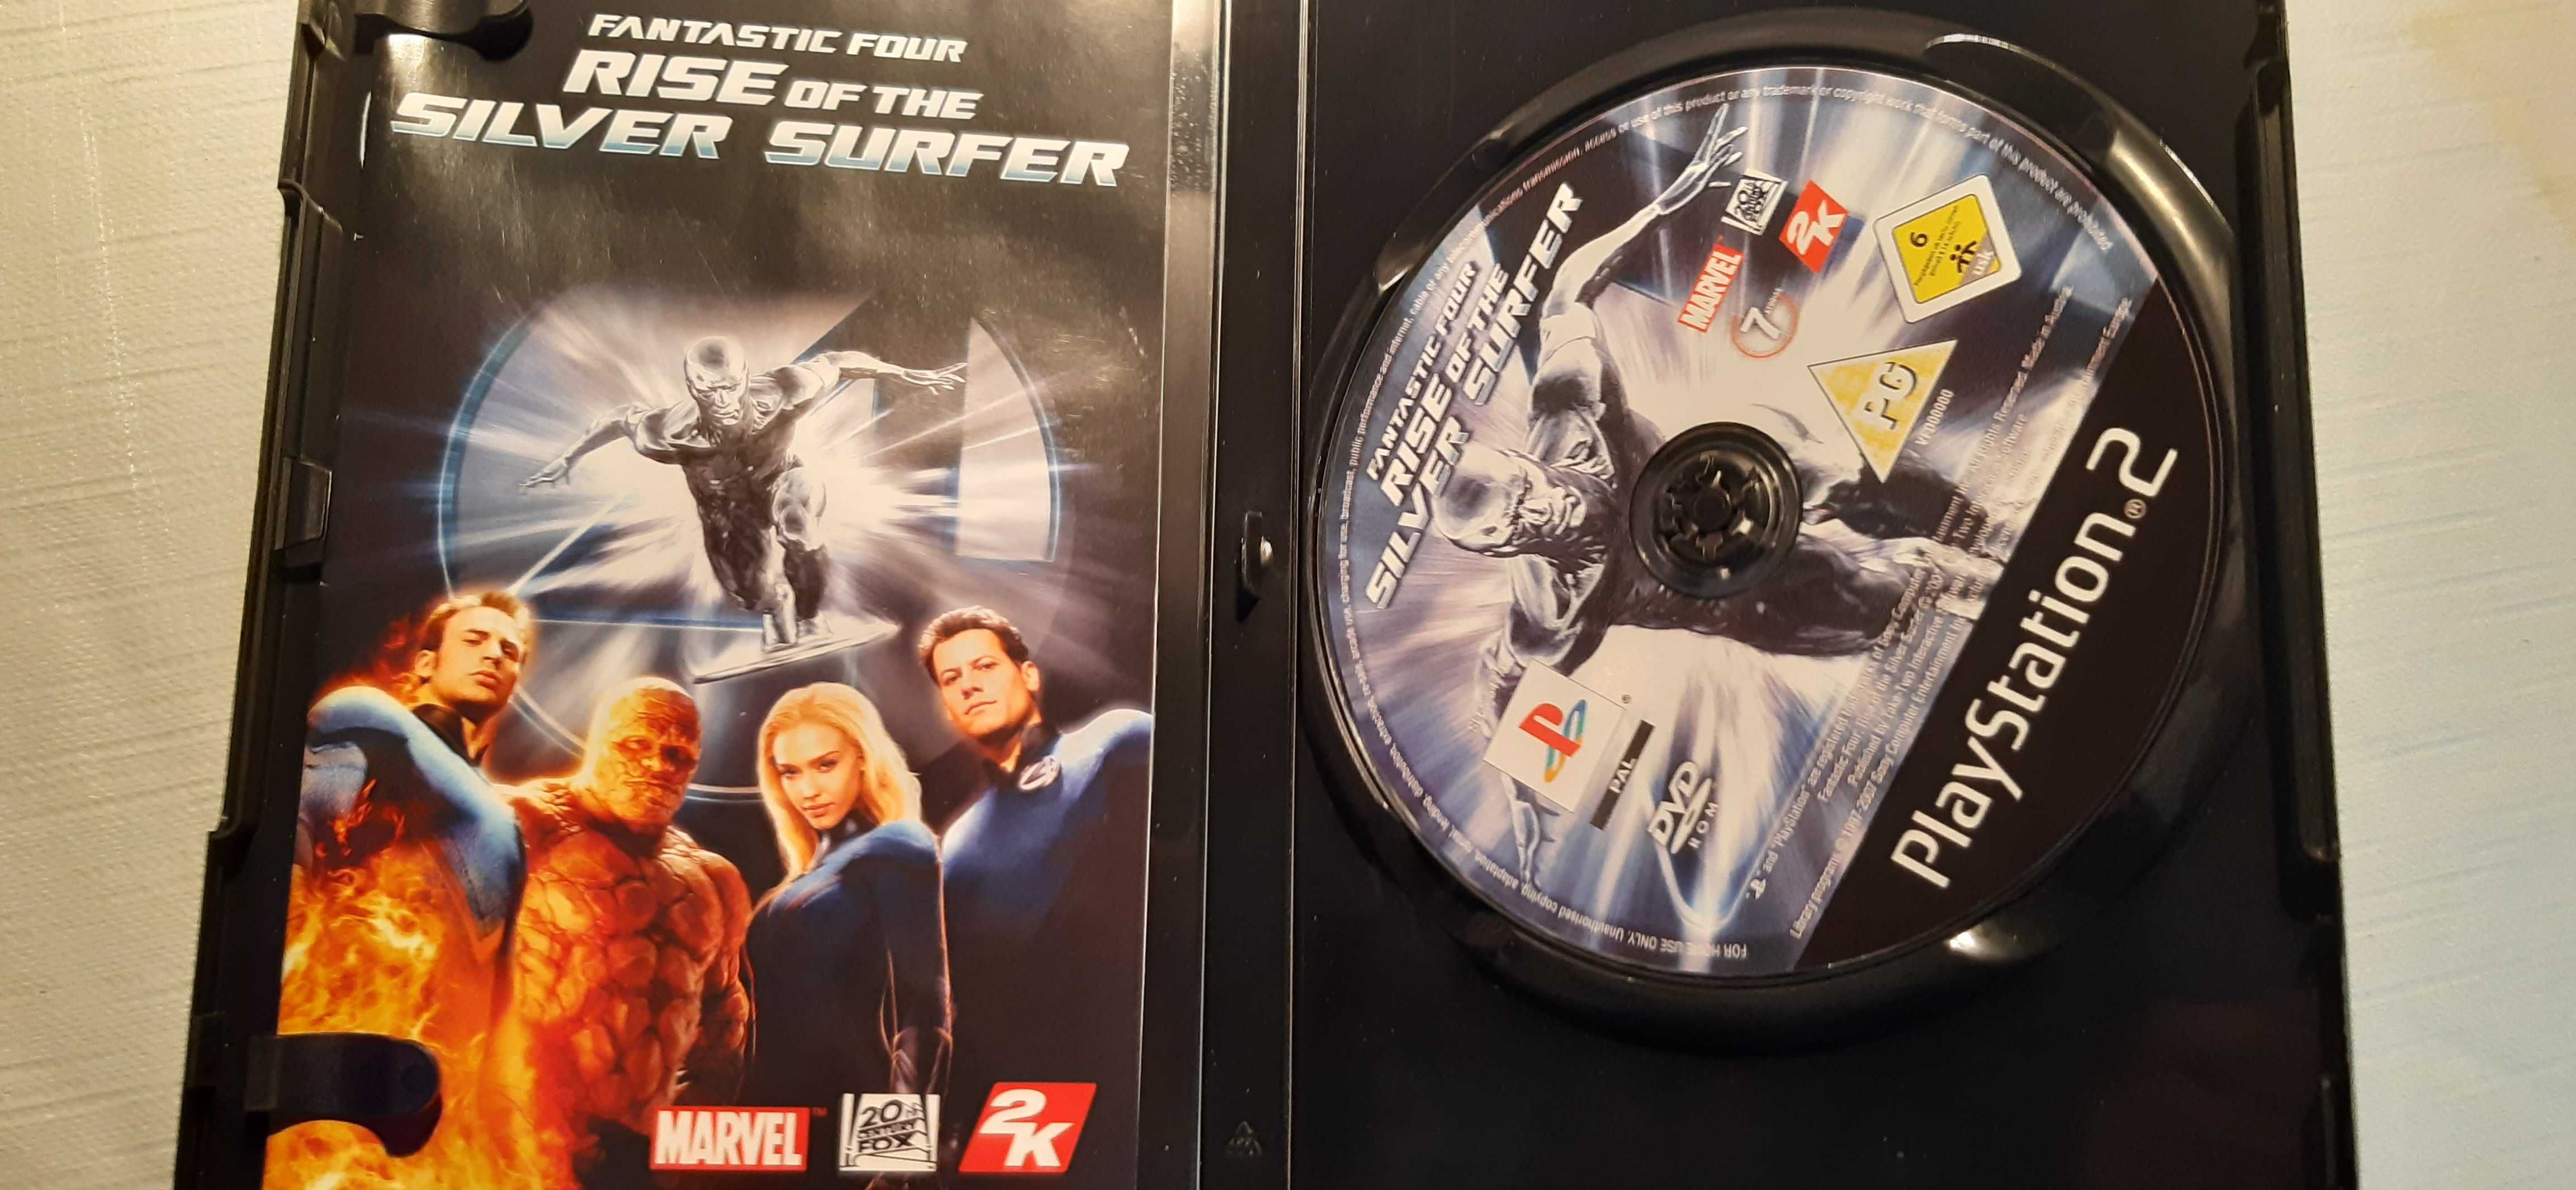 Fantastic Four Rise of the Silver Surfer PS2